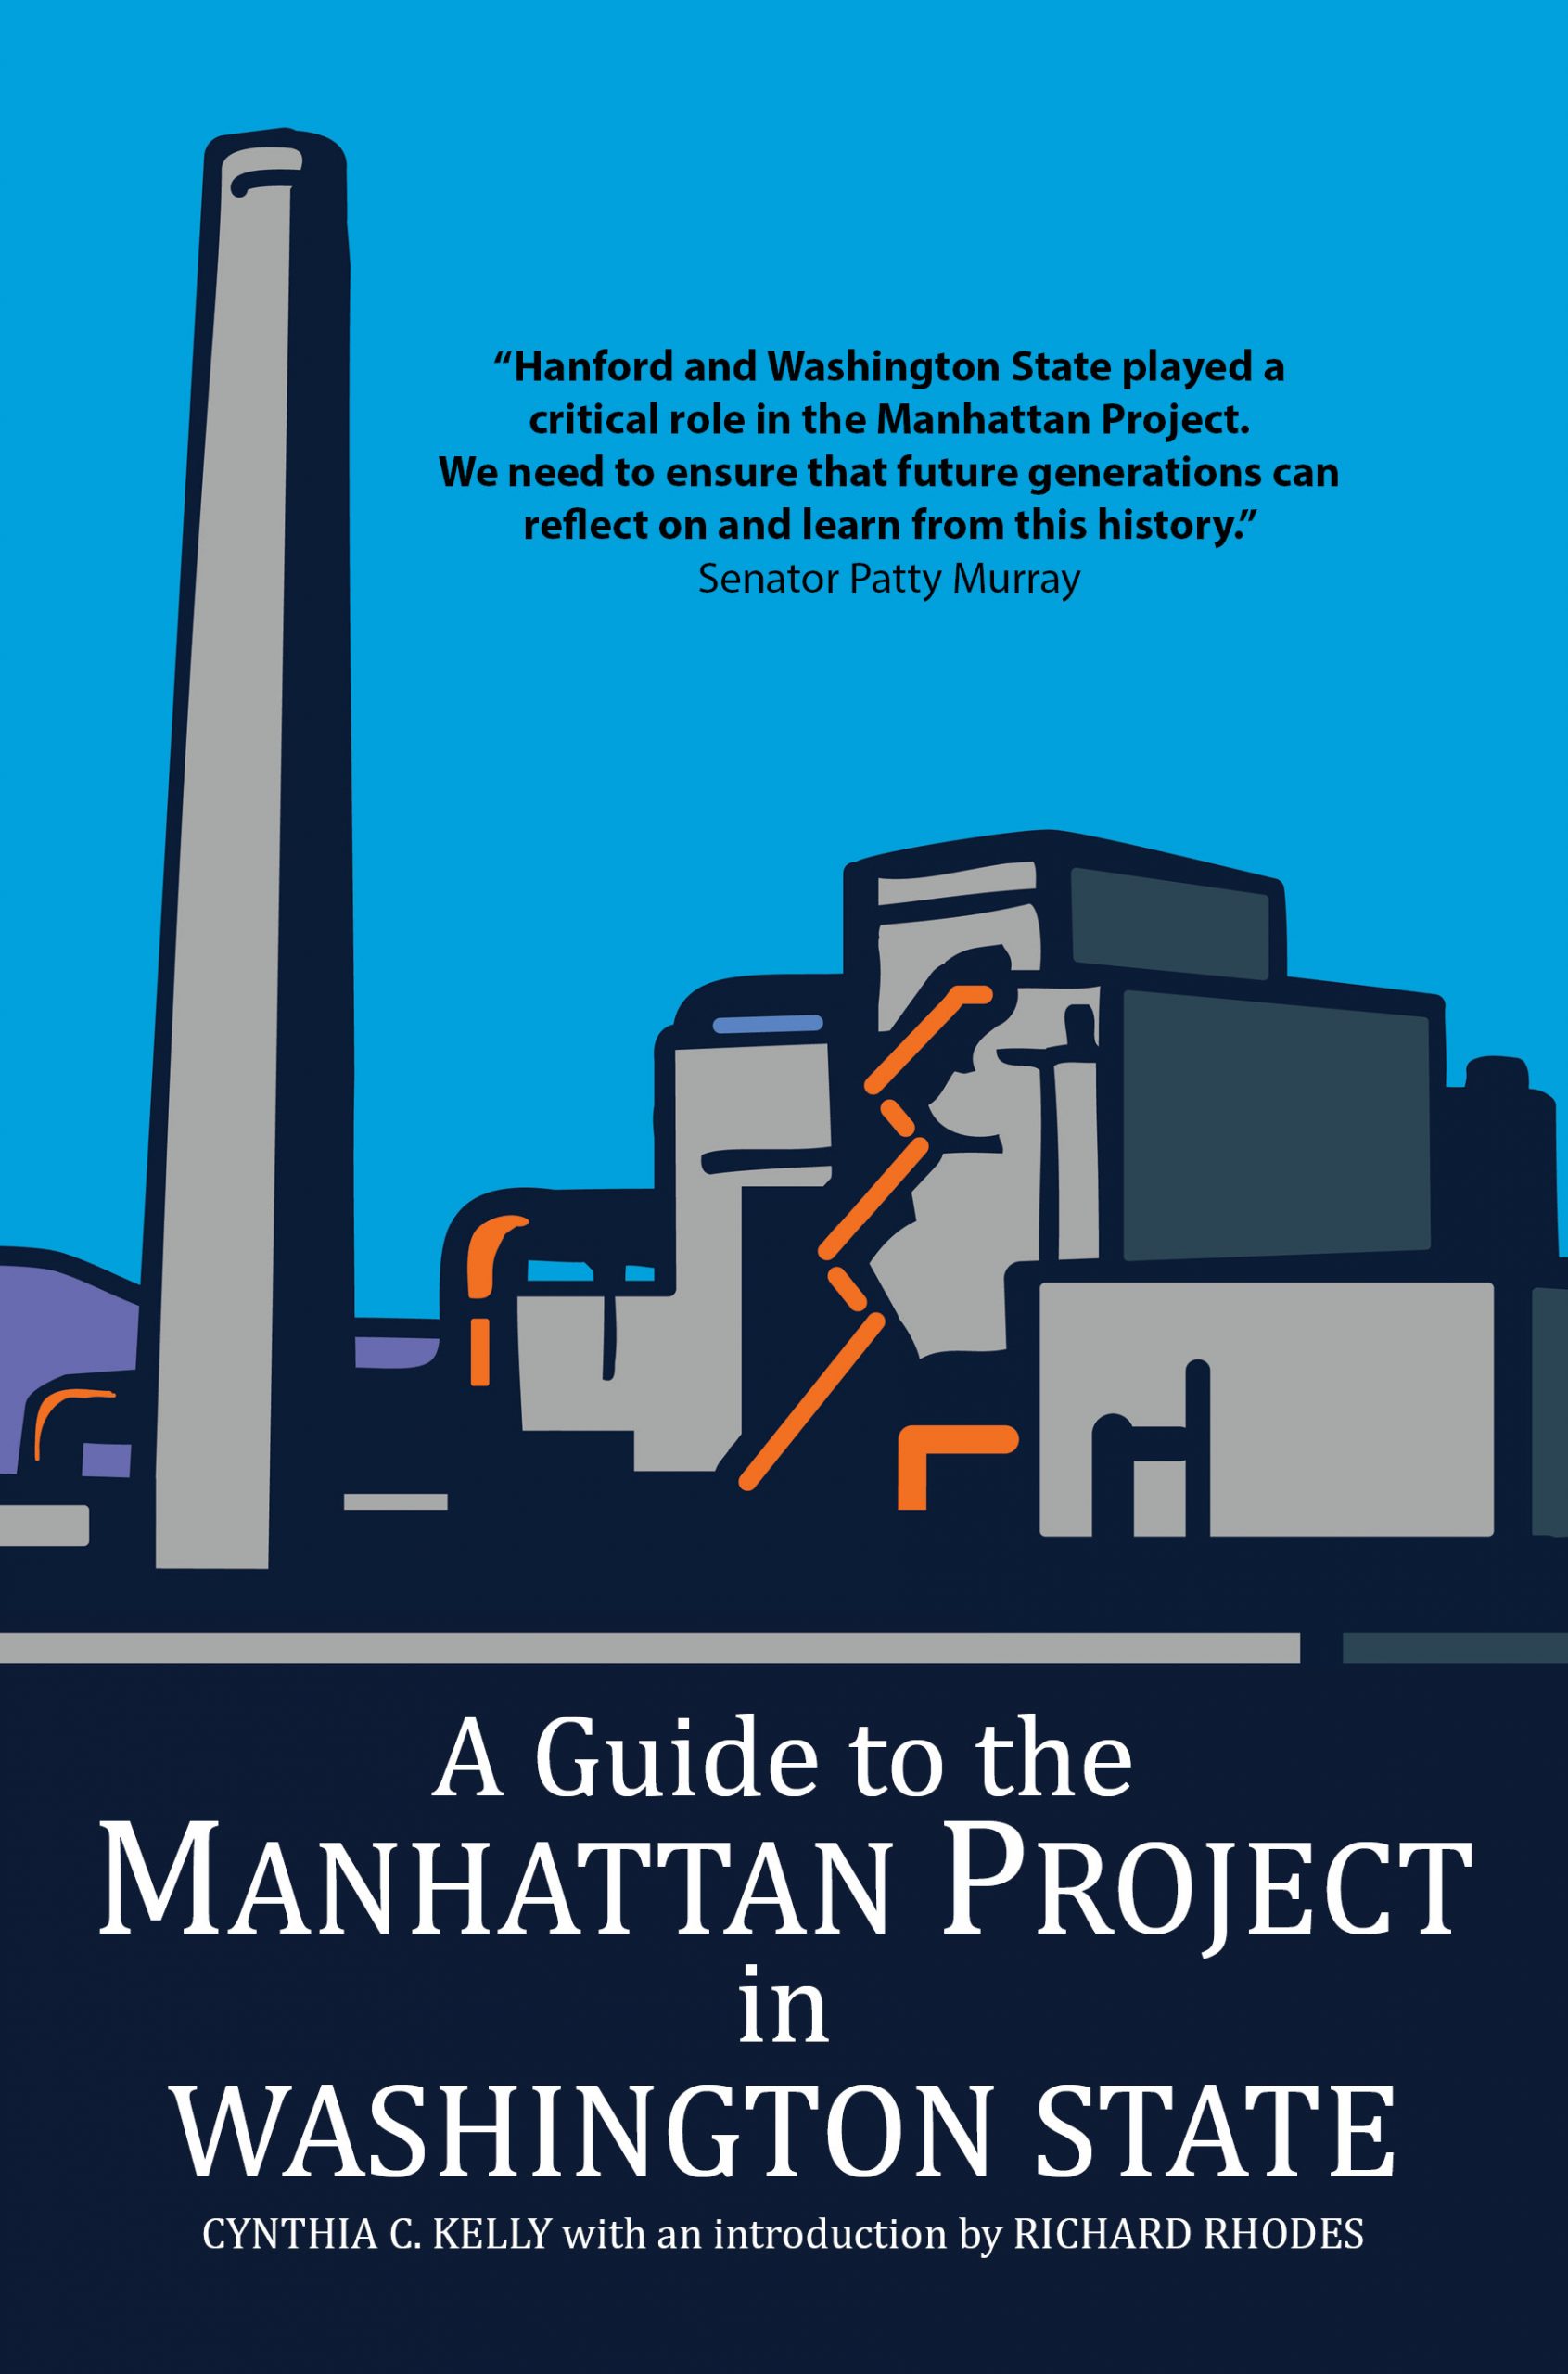 A Guide to the Manhattan Project in Washington State